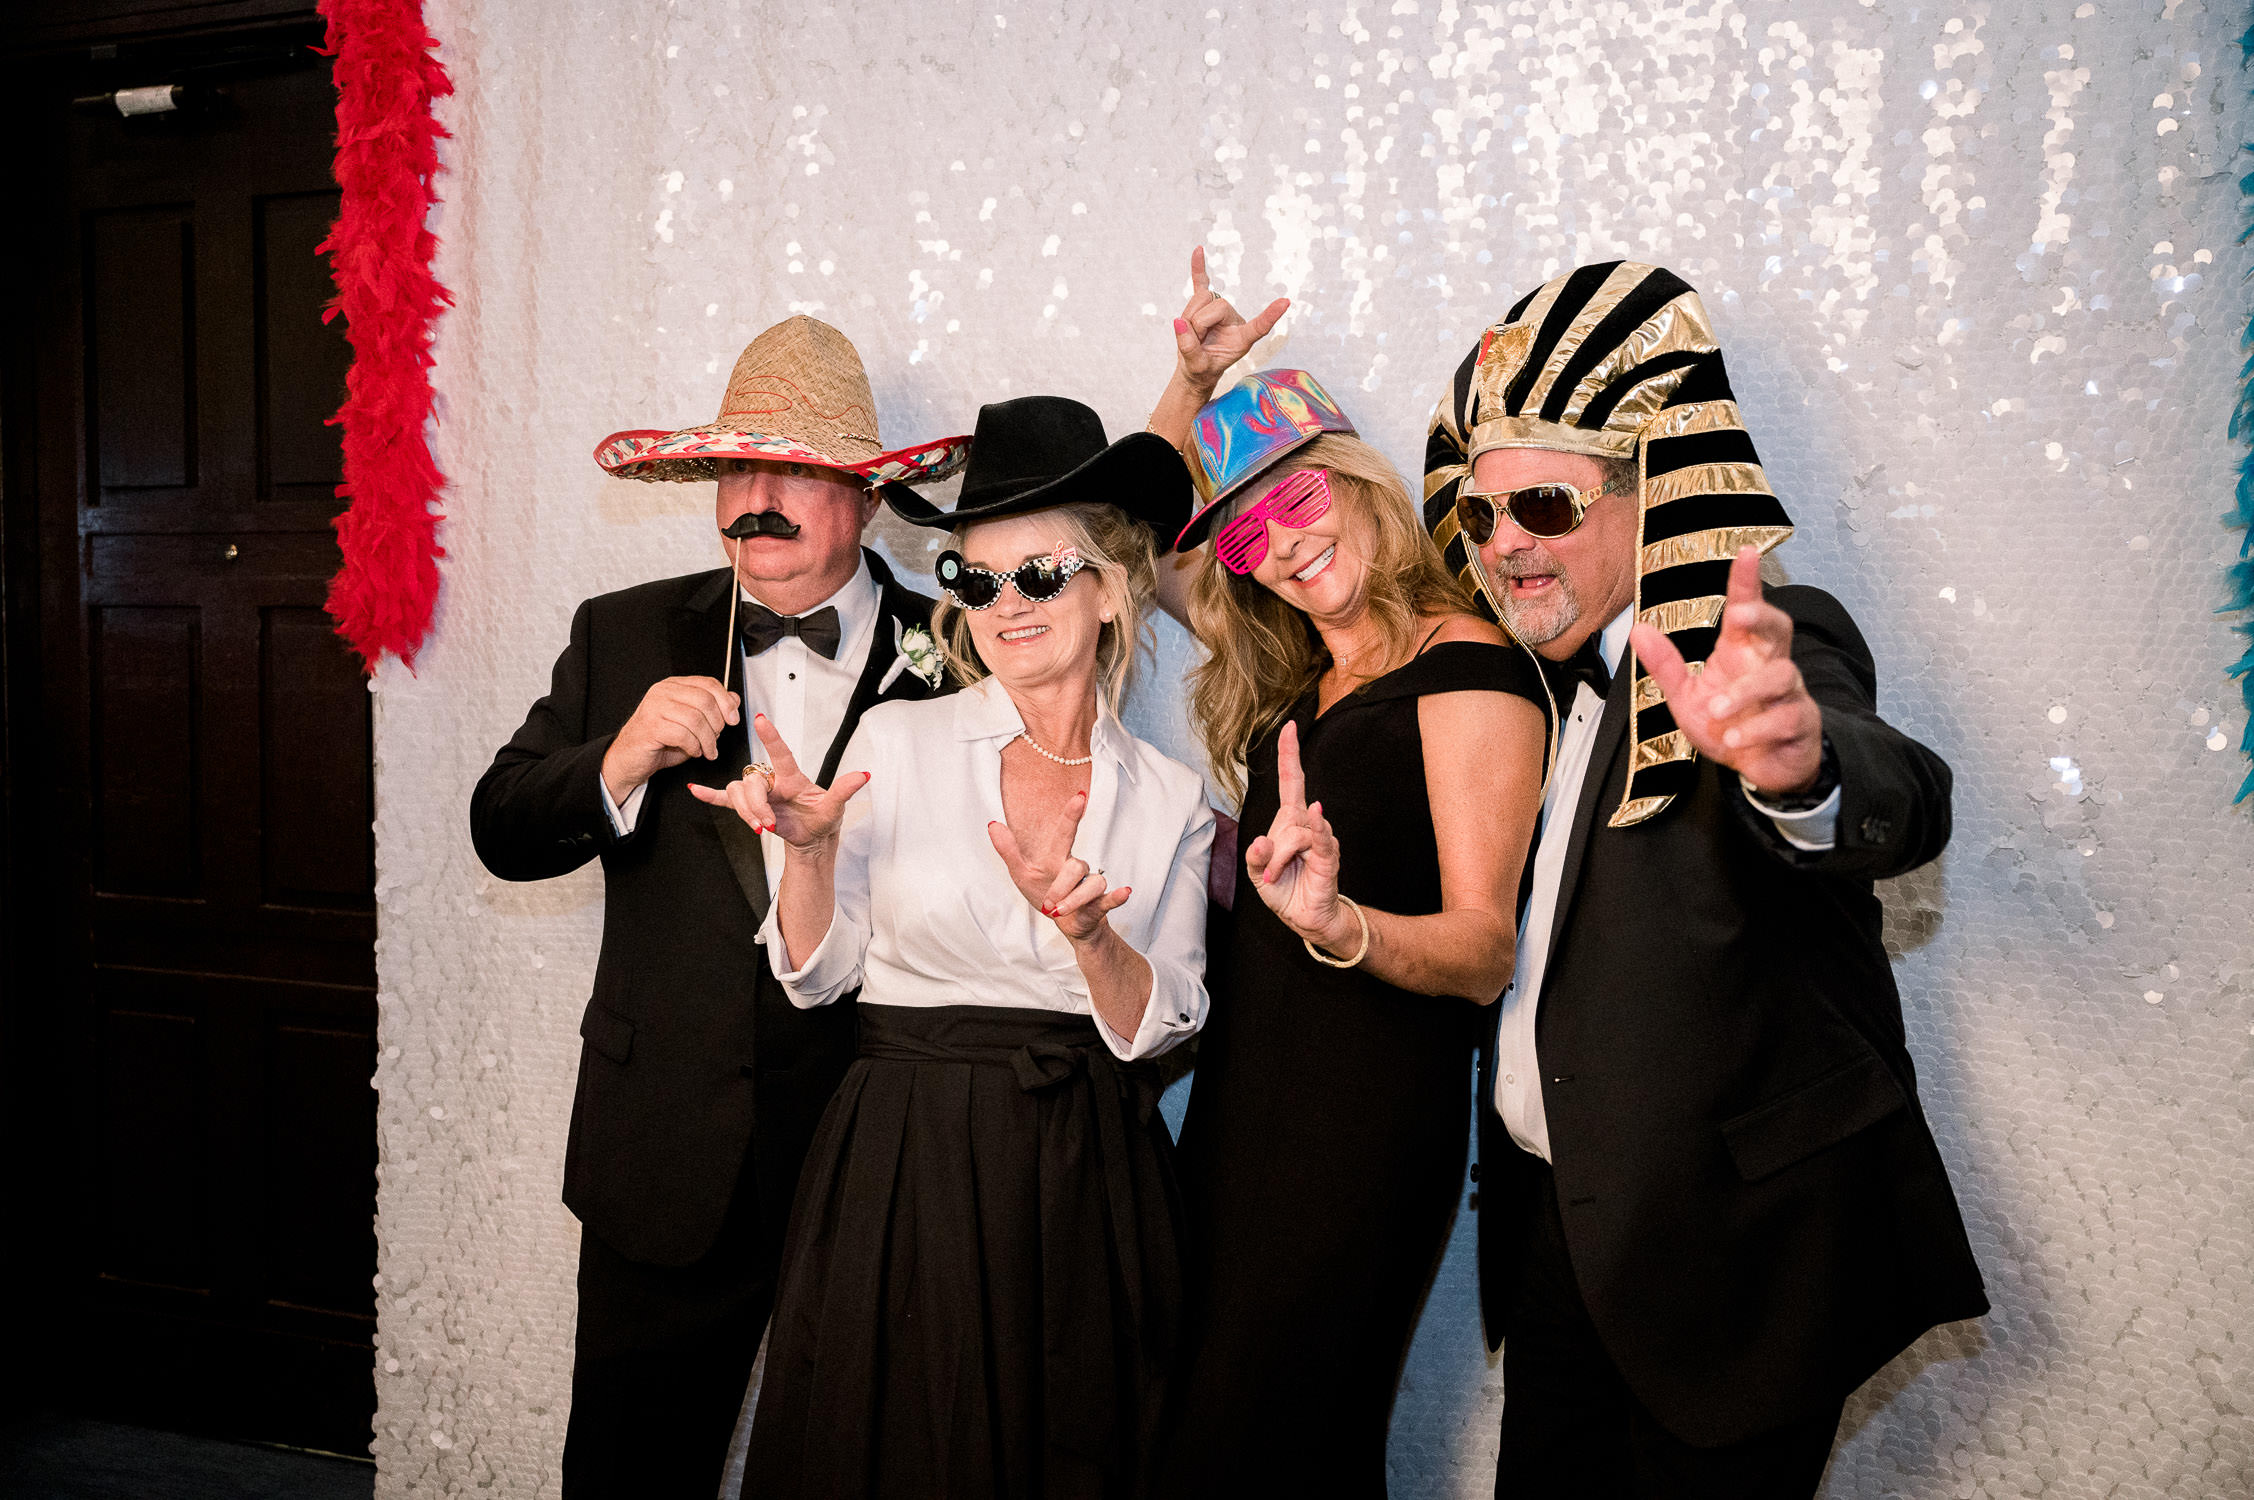 Four guests do silly poses for a photobooth.